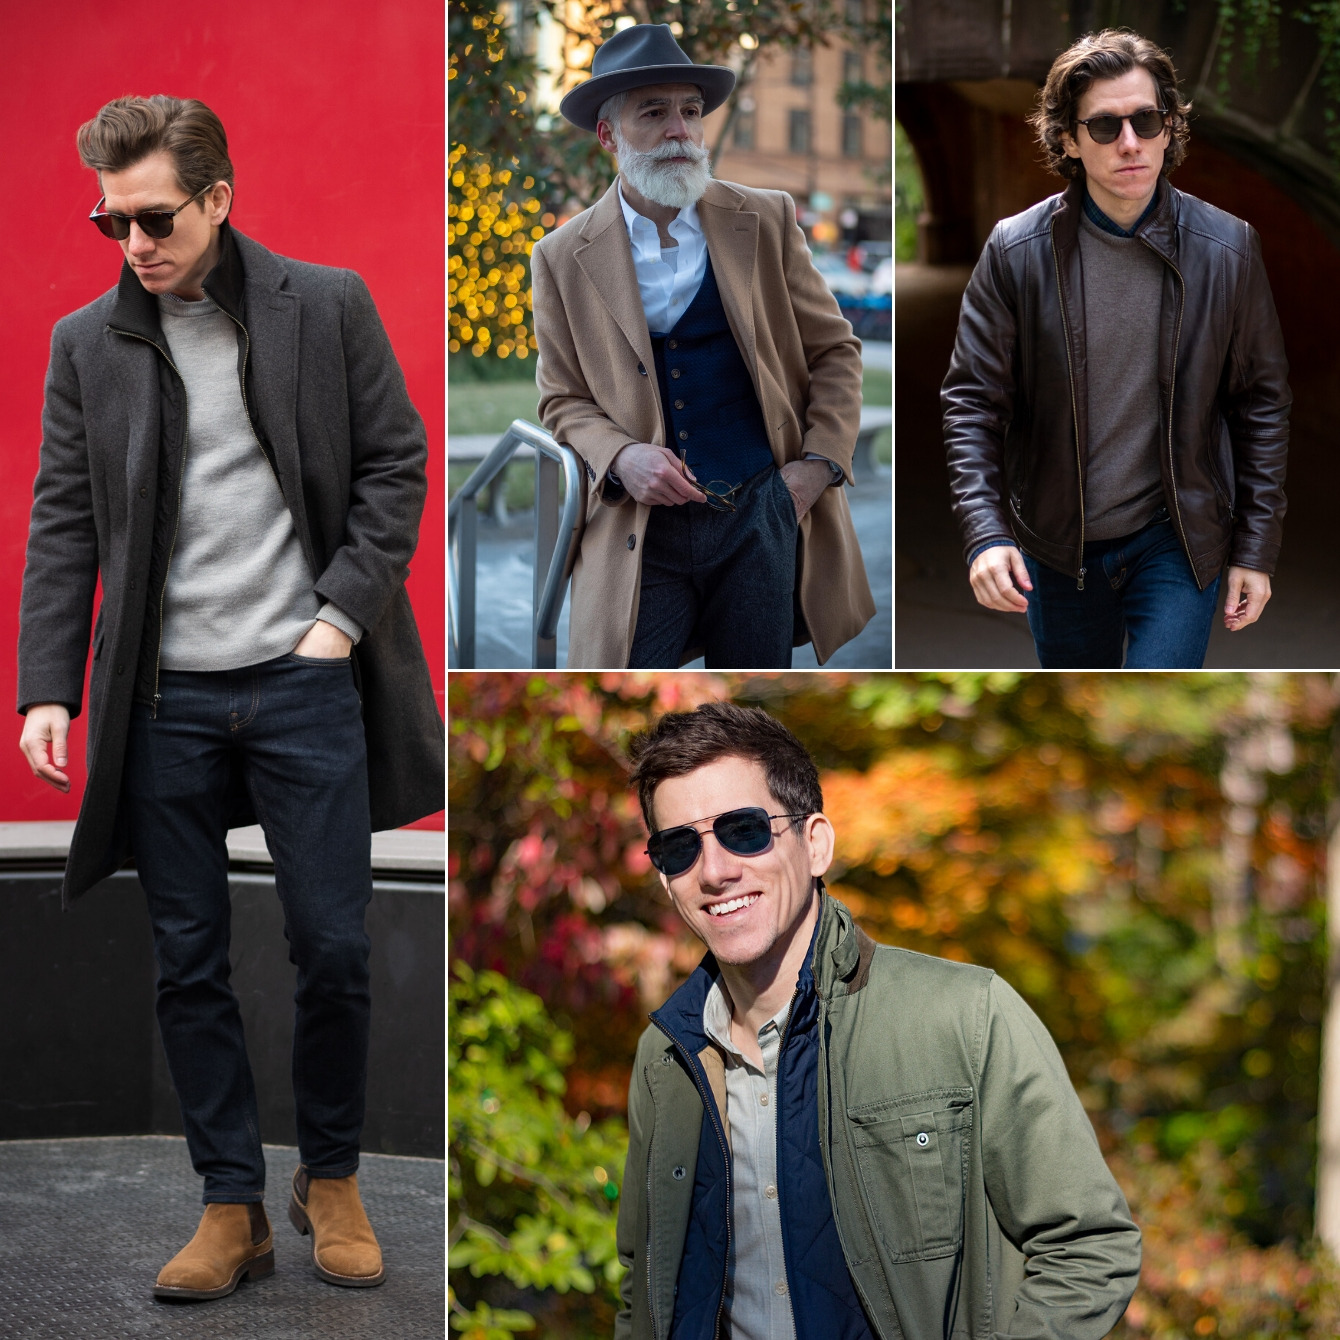 How to Look Smart in Winter: 7 Chic Cold Weather Outfits